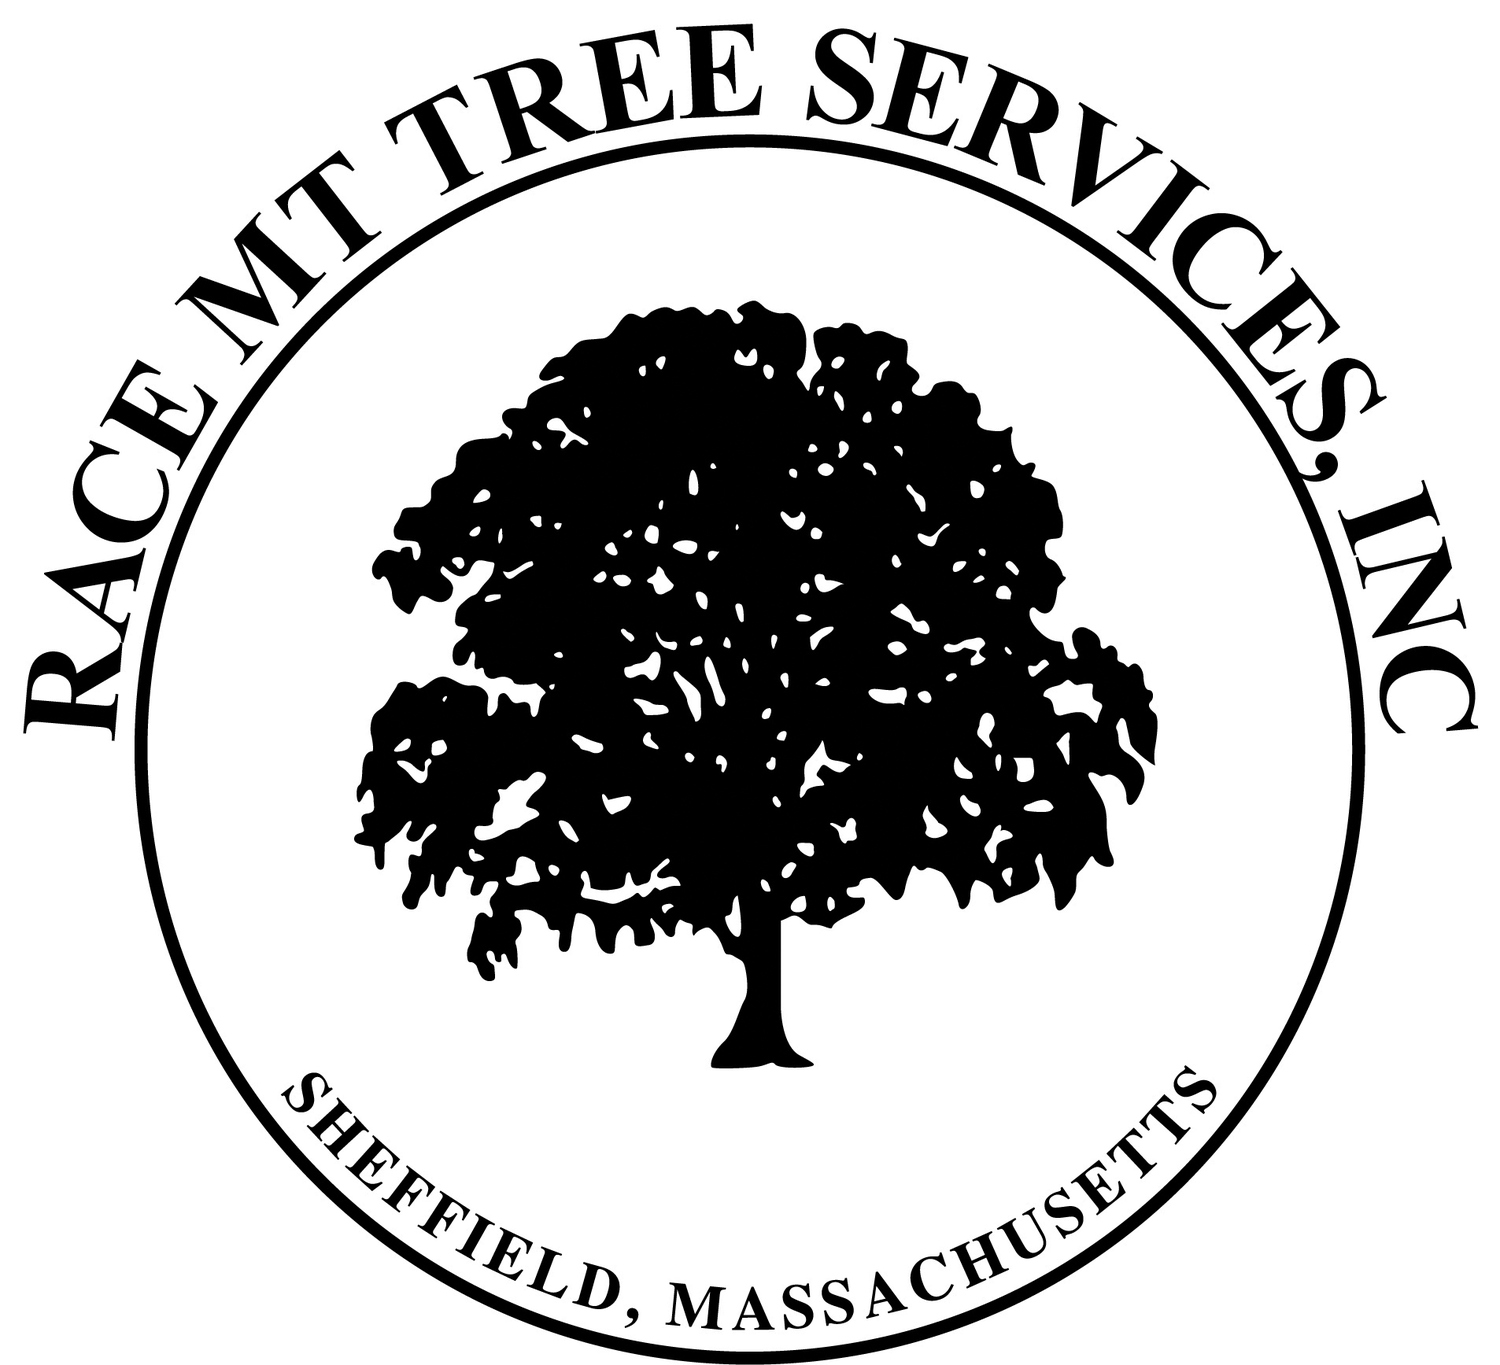 Race Mountain Tree Services, Inc. - Sheffield, MA - Professional Tree Care in The Berkshires, MA, CT, NY